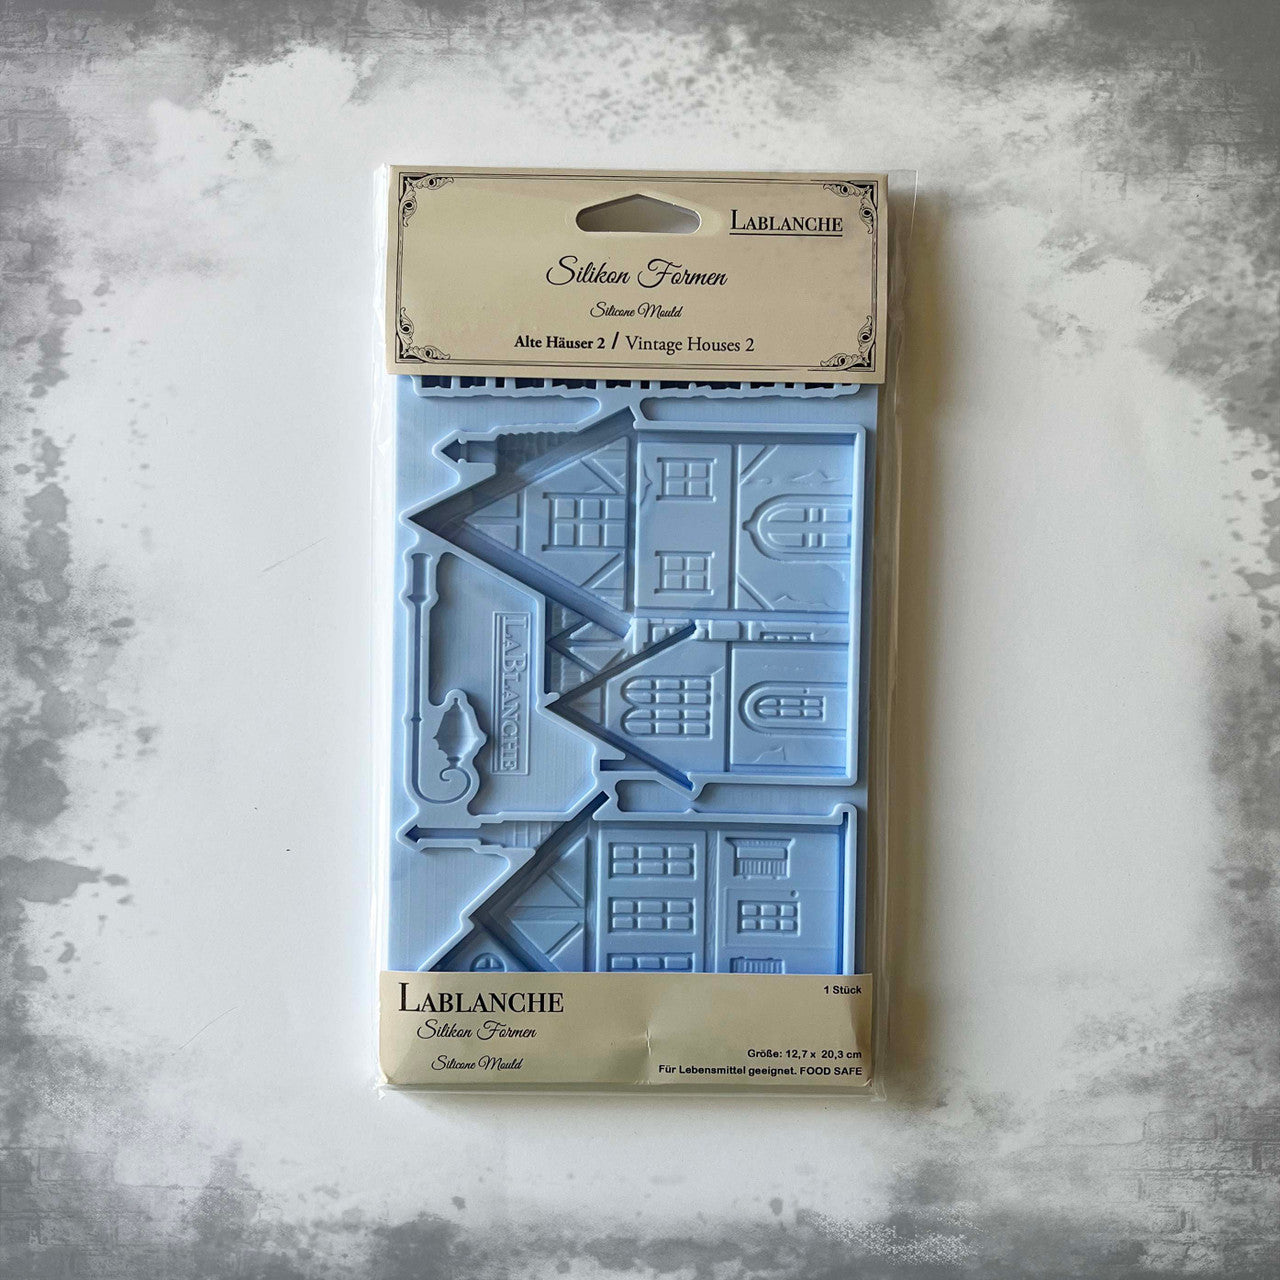 LeBlanche Vintage Houses 2 Silicone Mould - Limited Edition